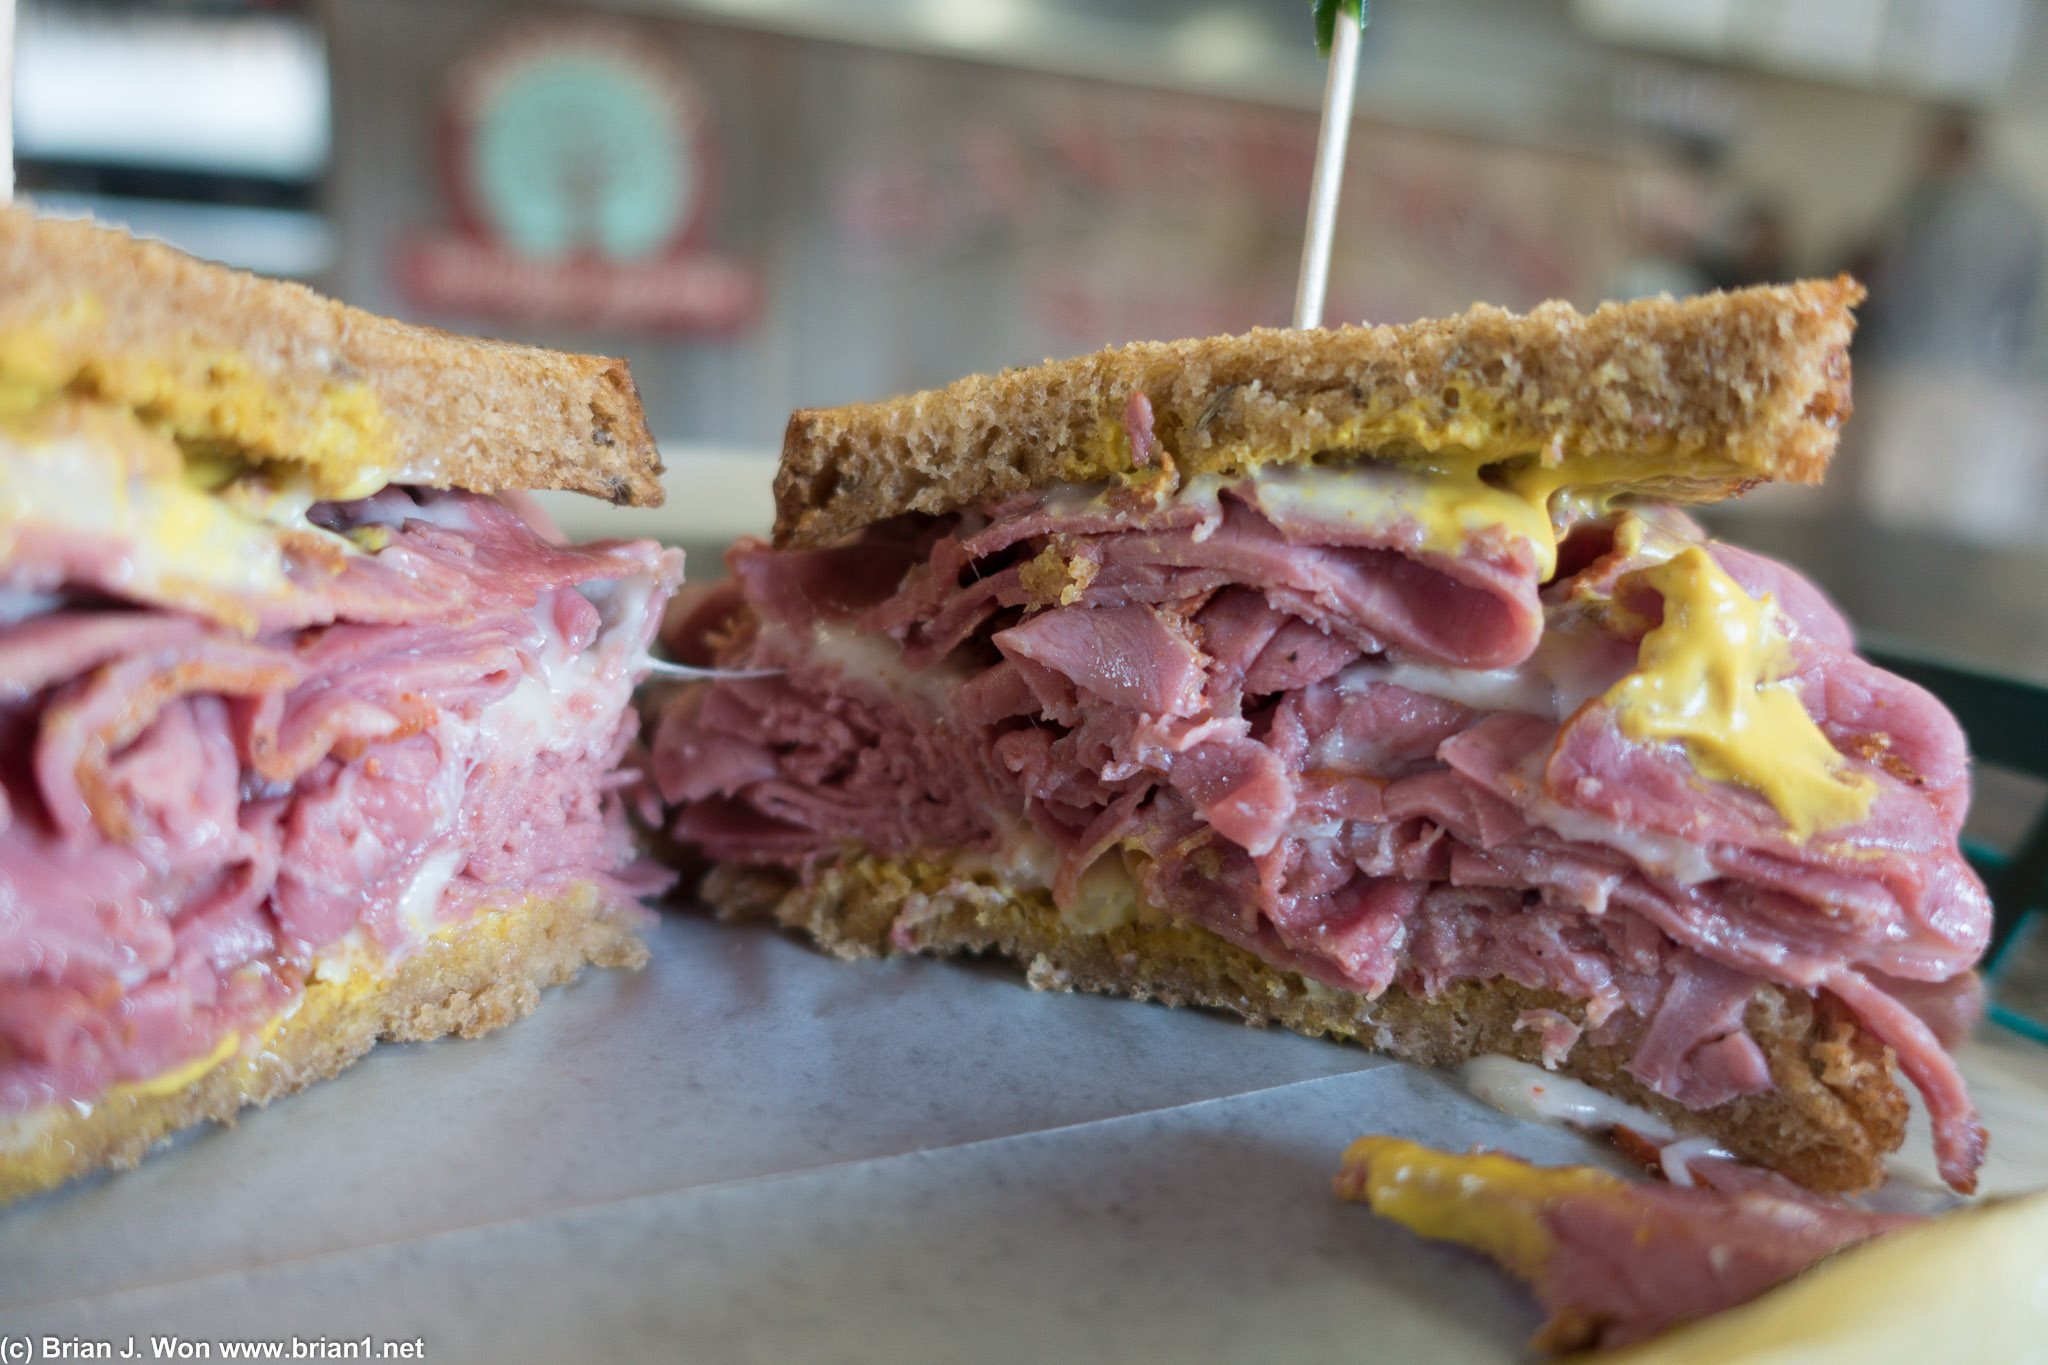 Pastrami and corned beef at Mahogany Smoked Meats for lunch.